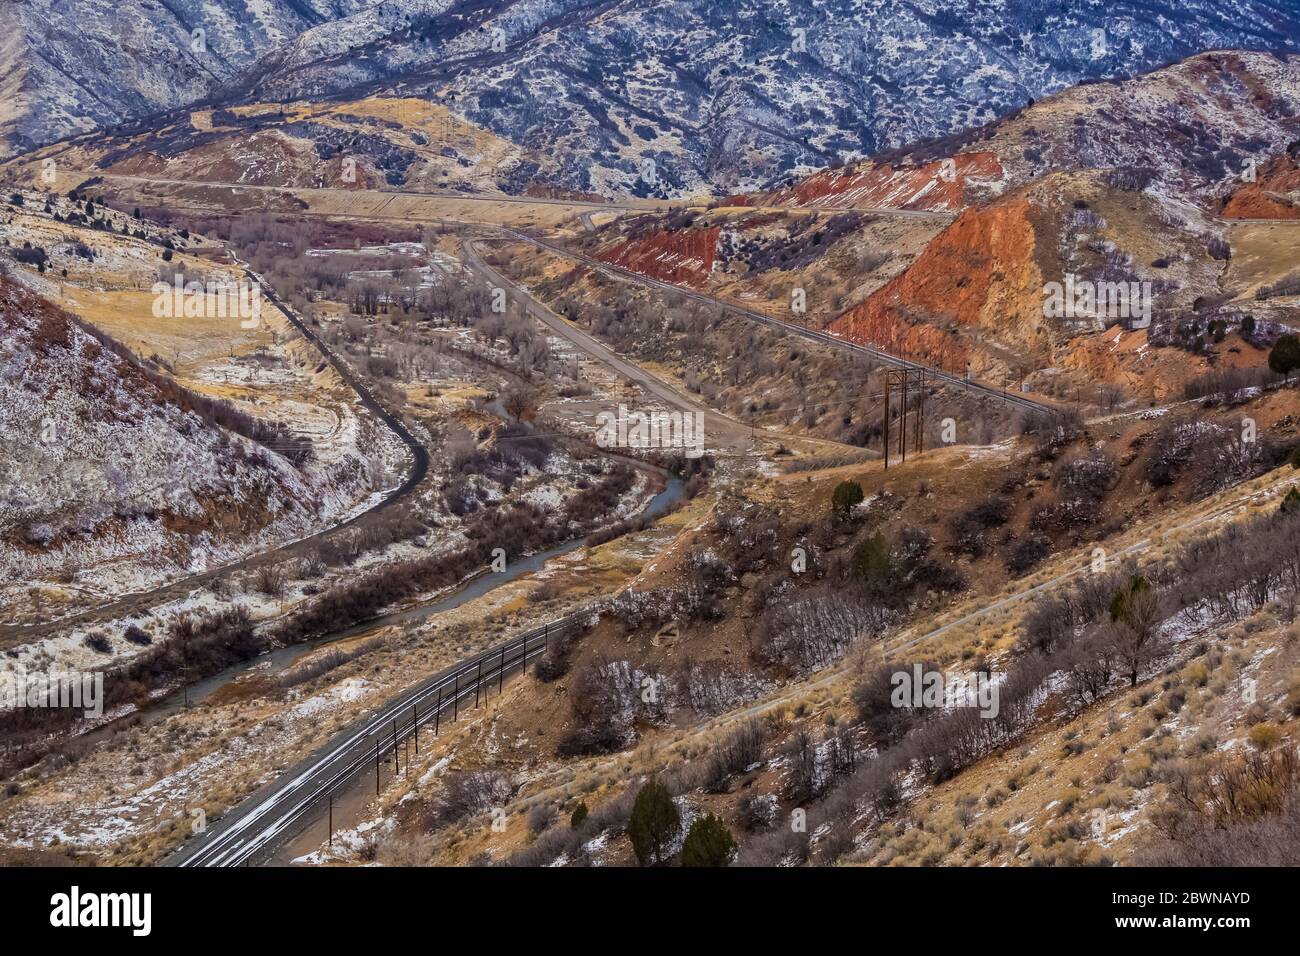 Union Pacific Railroad tracks running through the Wasatch Mountains between Spanish Fork and Price, Utah, USA Stock Photo